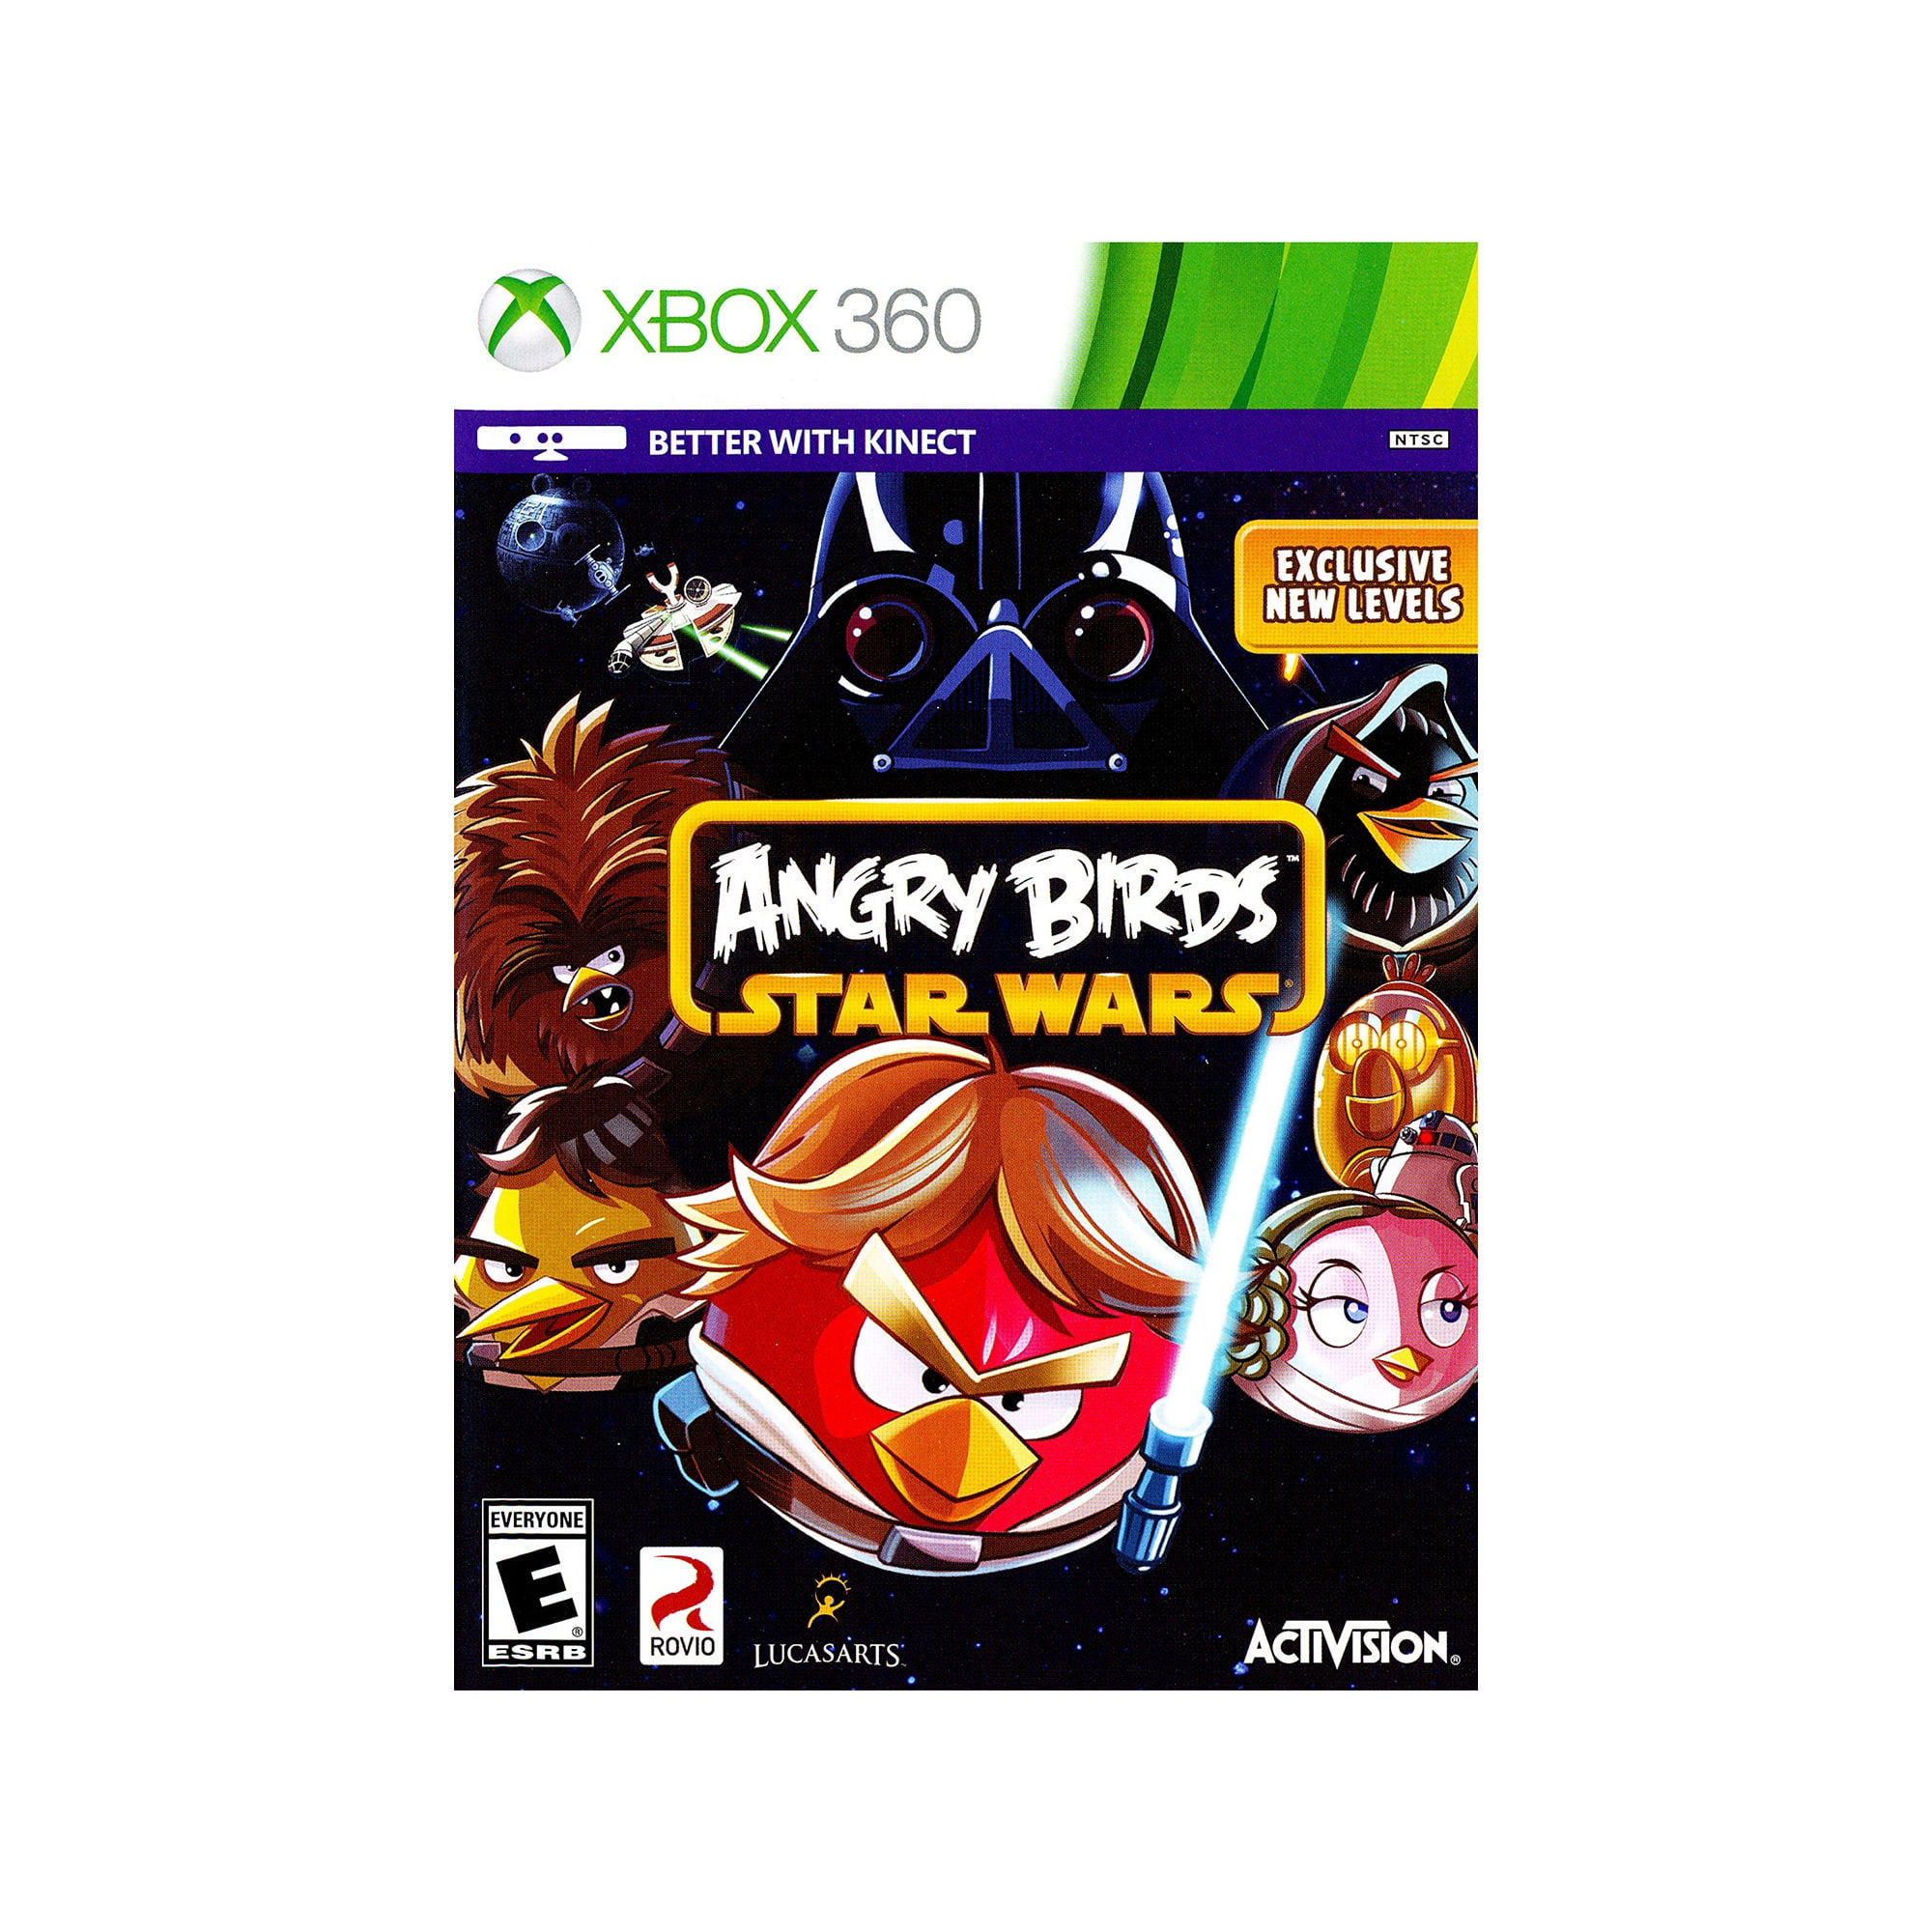 Since I have Game Center account I can download old games : r/angrybirds